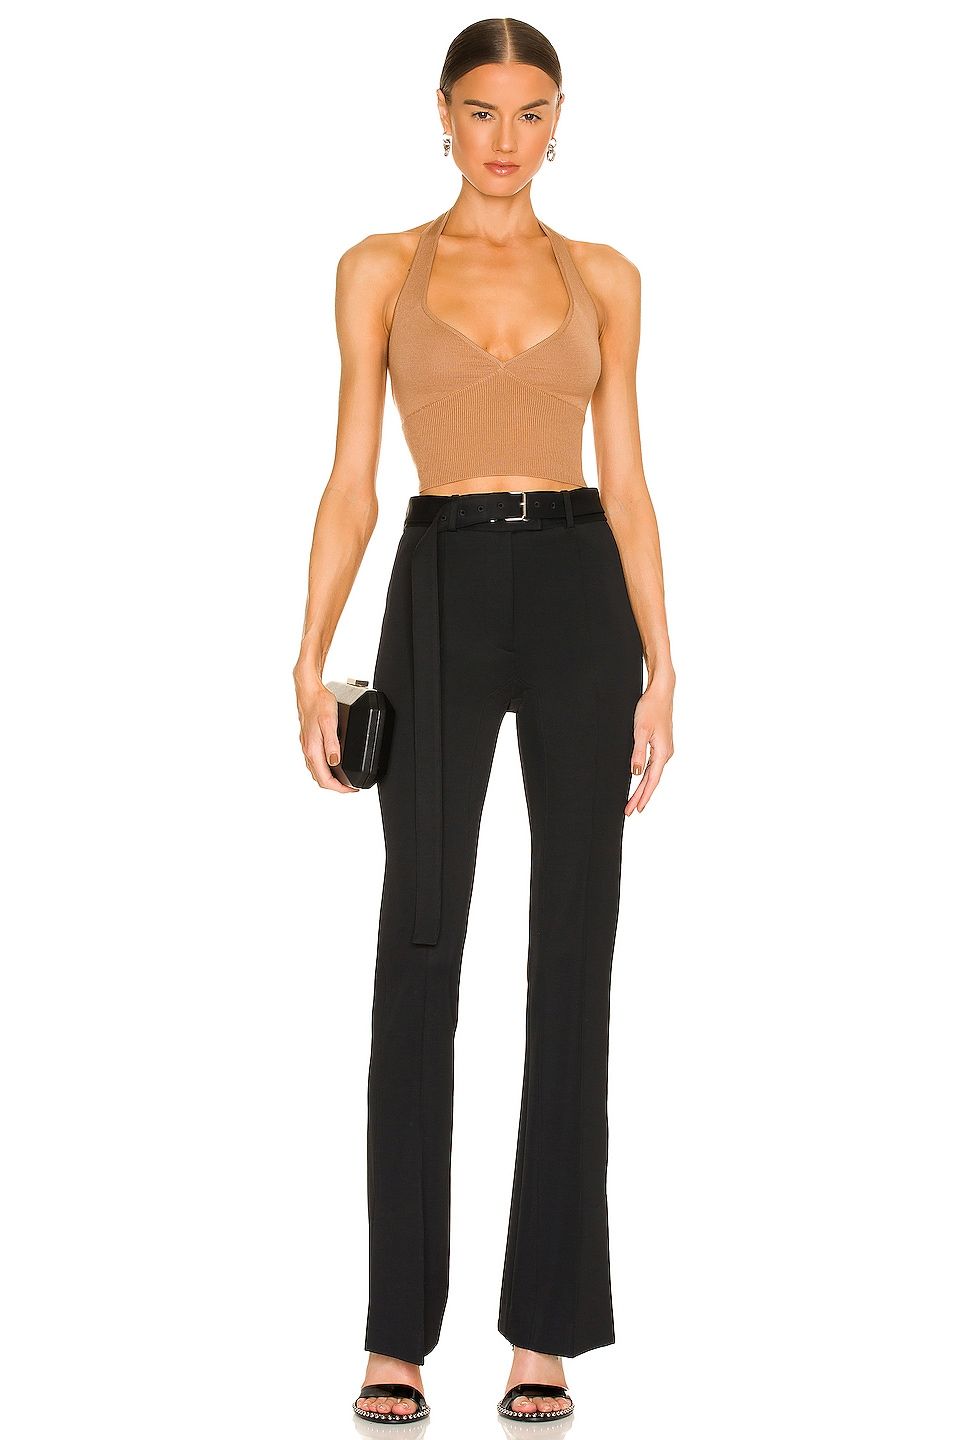 Black Dress Pants with Cropped Top Outfits (4 ideas & outfits